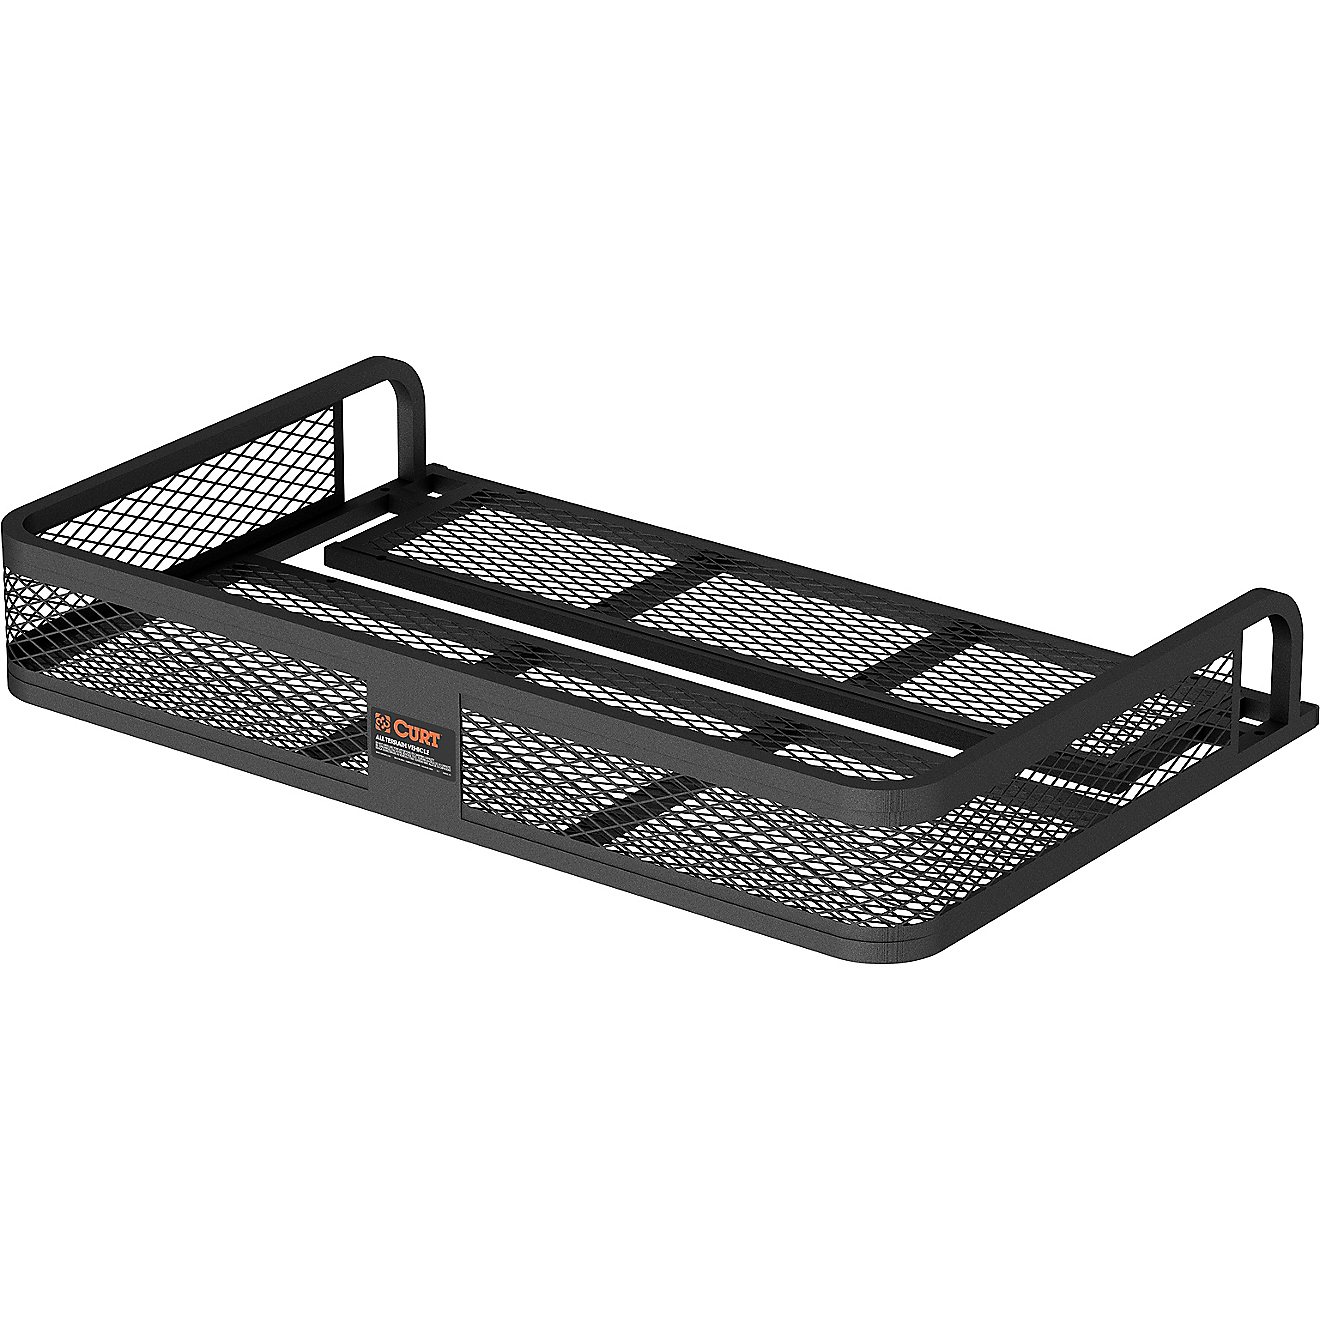 CURT 41 in x 26 in Universal ATV Cargo Carrier                                                                                   - view number 1